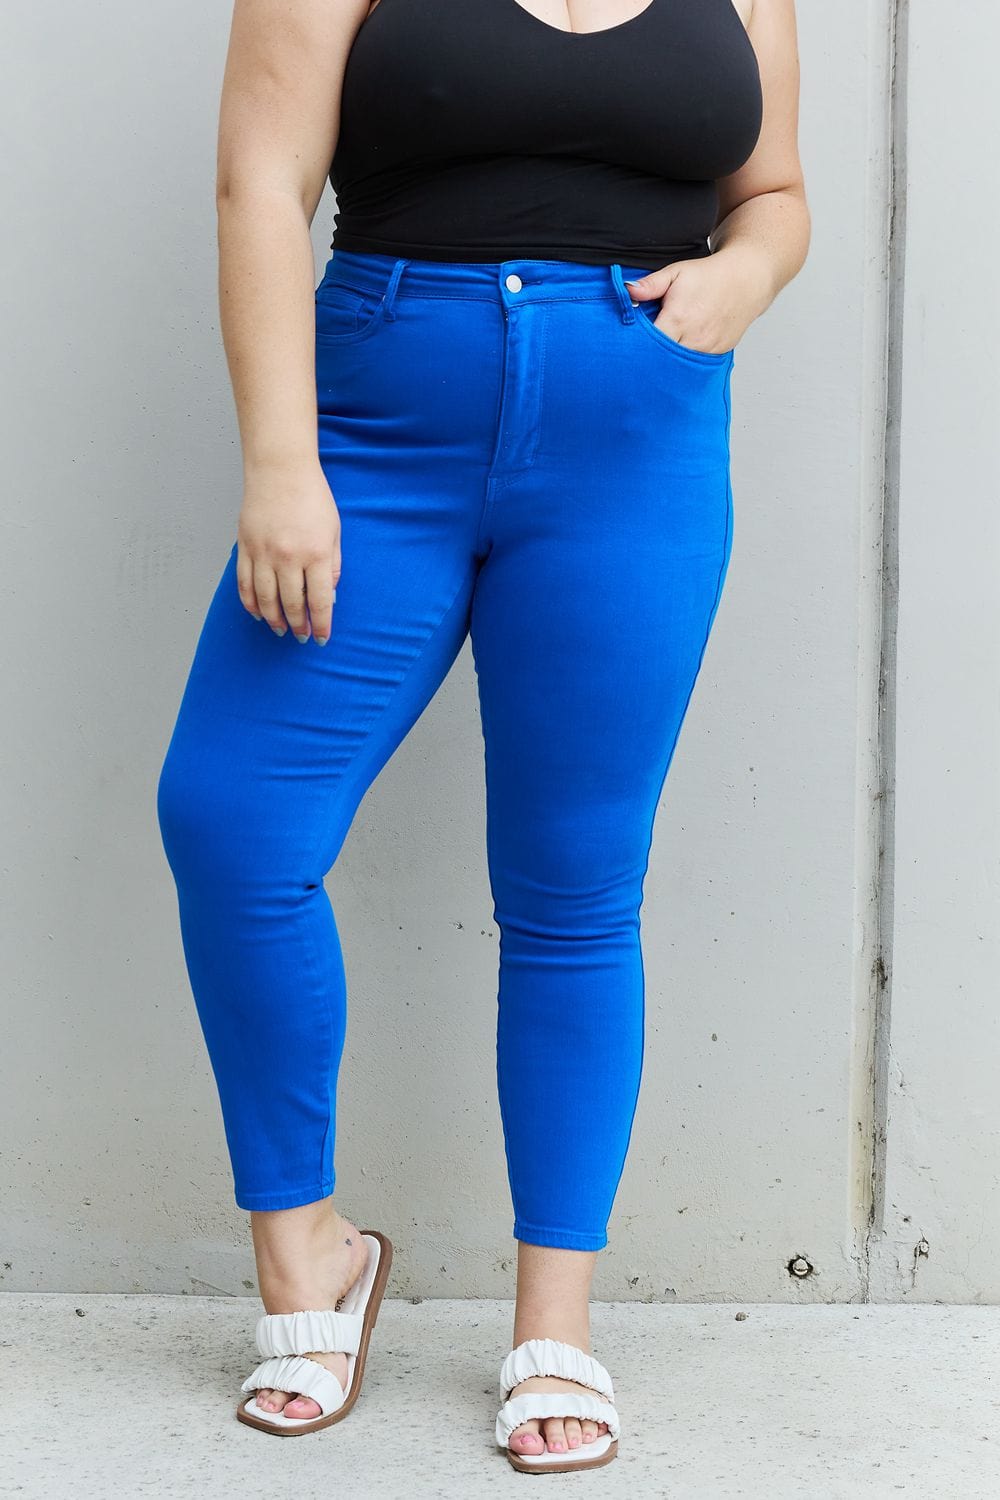 Judy Blue Stacy Full Size High Waist Tummy Control Skinny Jeans MS231013042895F0(24) Cobalt Blue / 0(24)